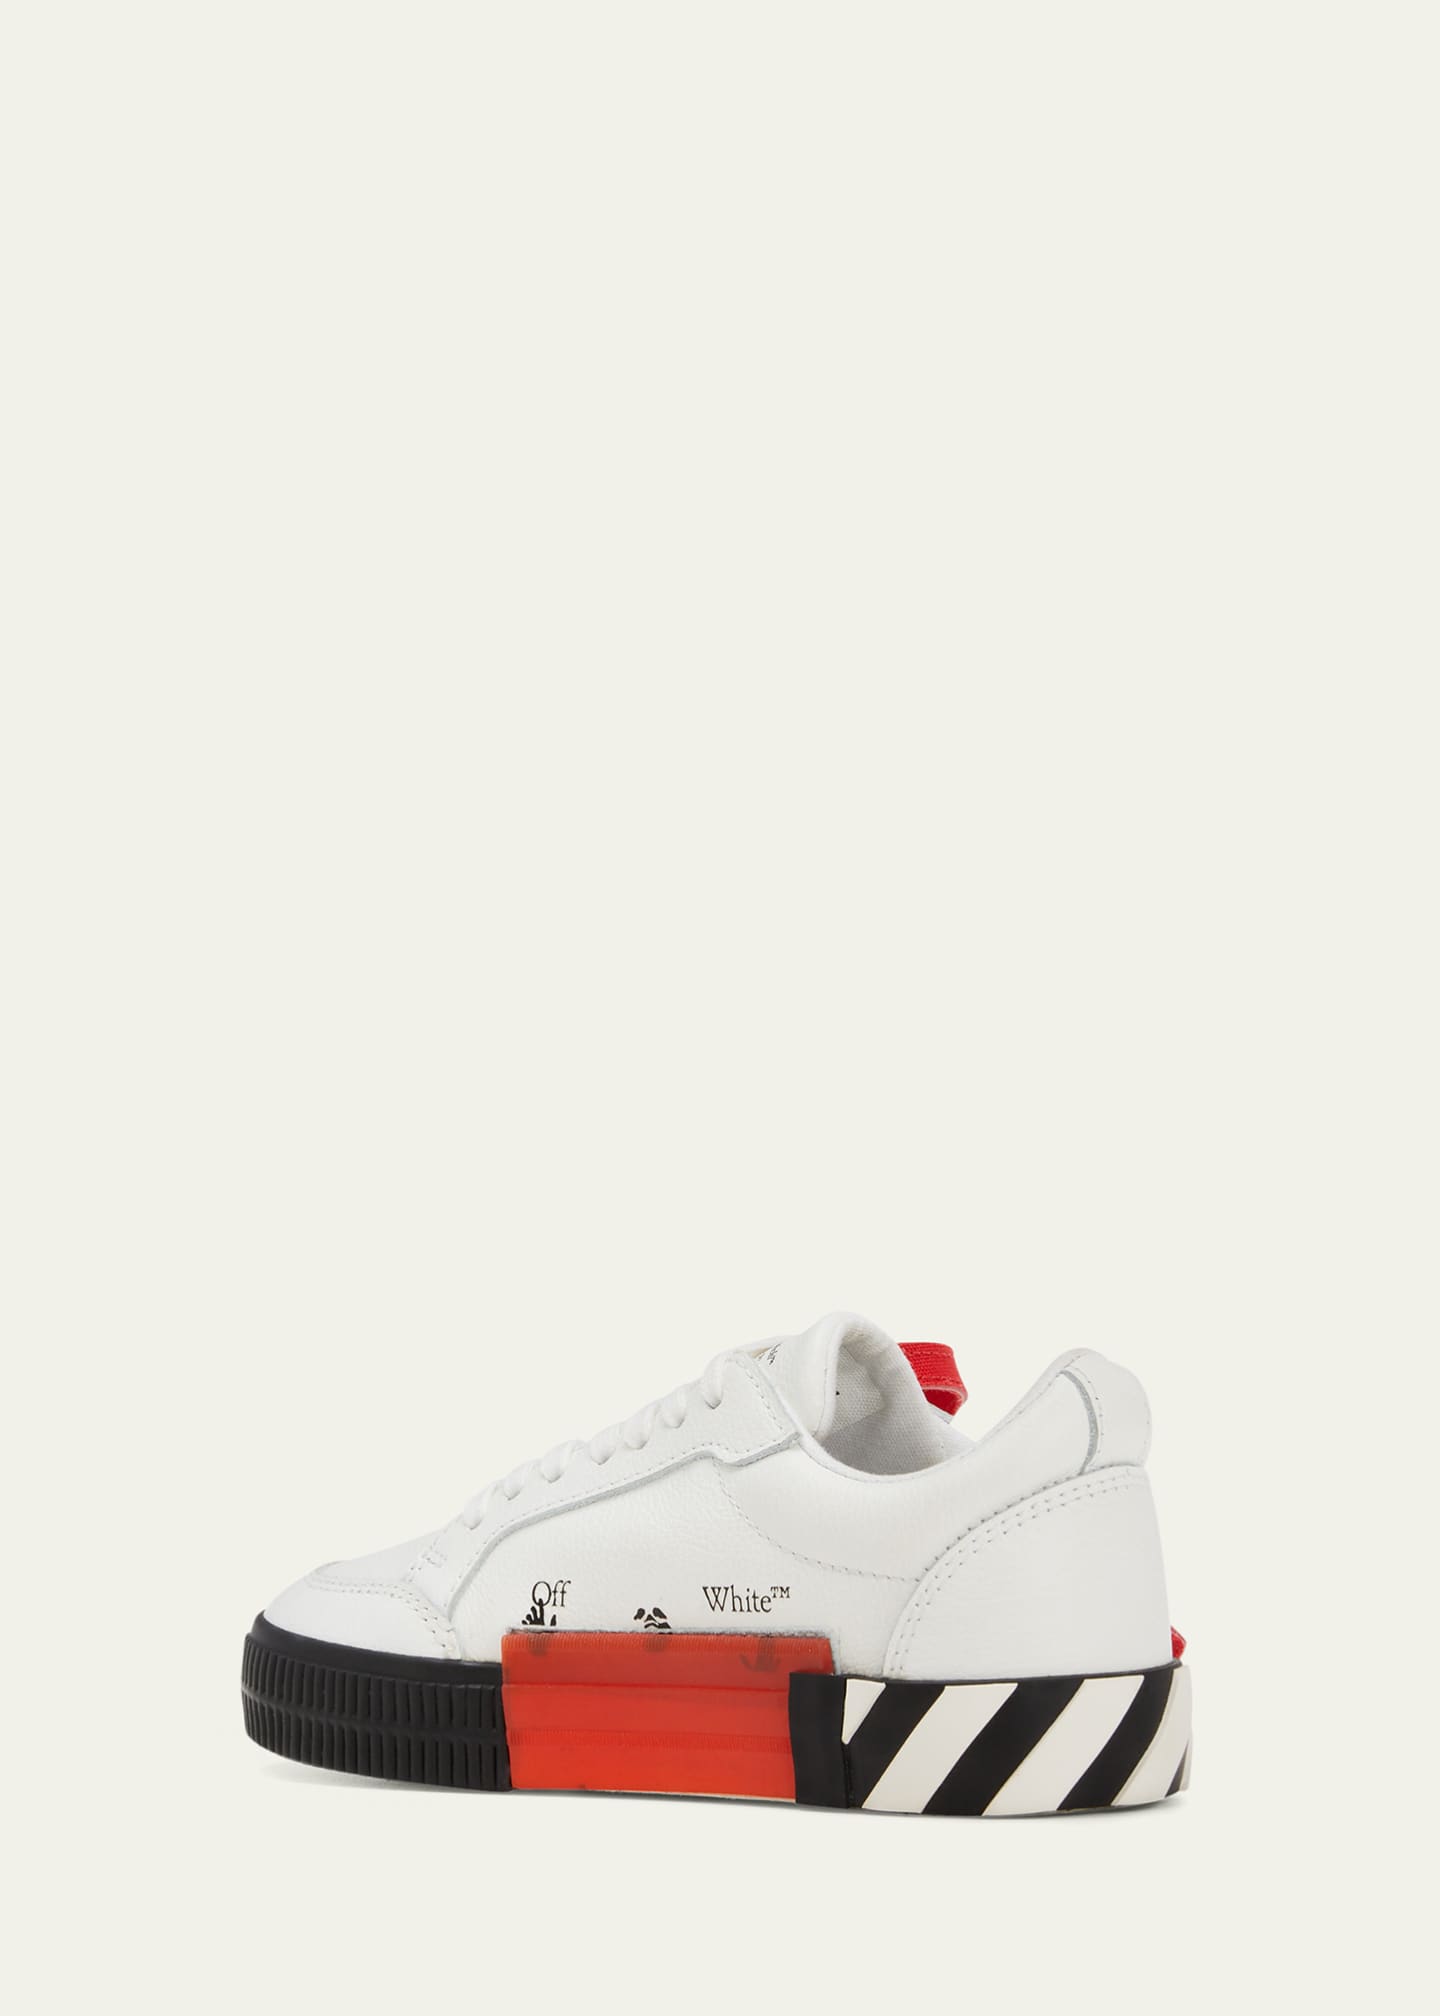 Off-White Kid's Arrow Leather Low-Top Sneakers, Size Toddlers/Kids ...